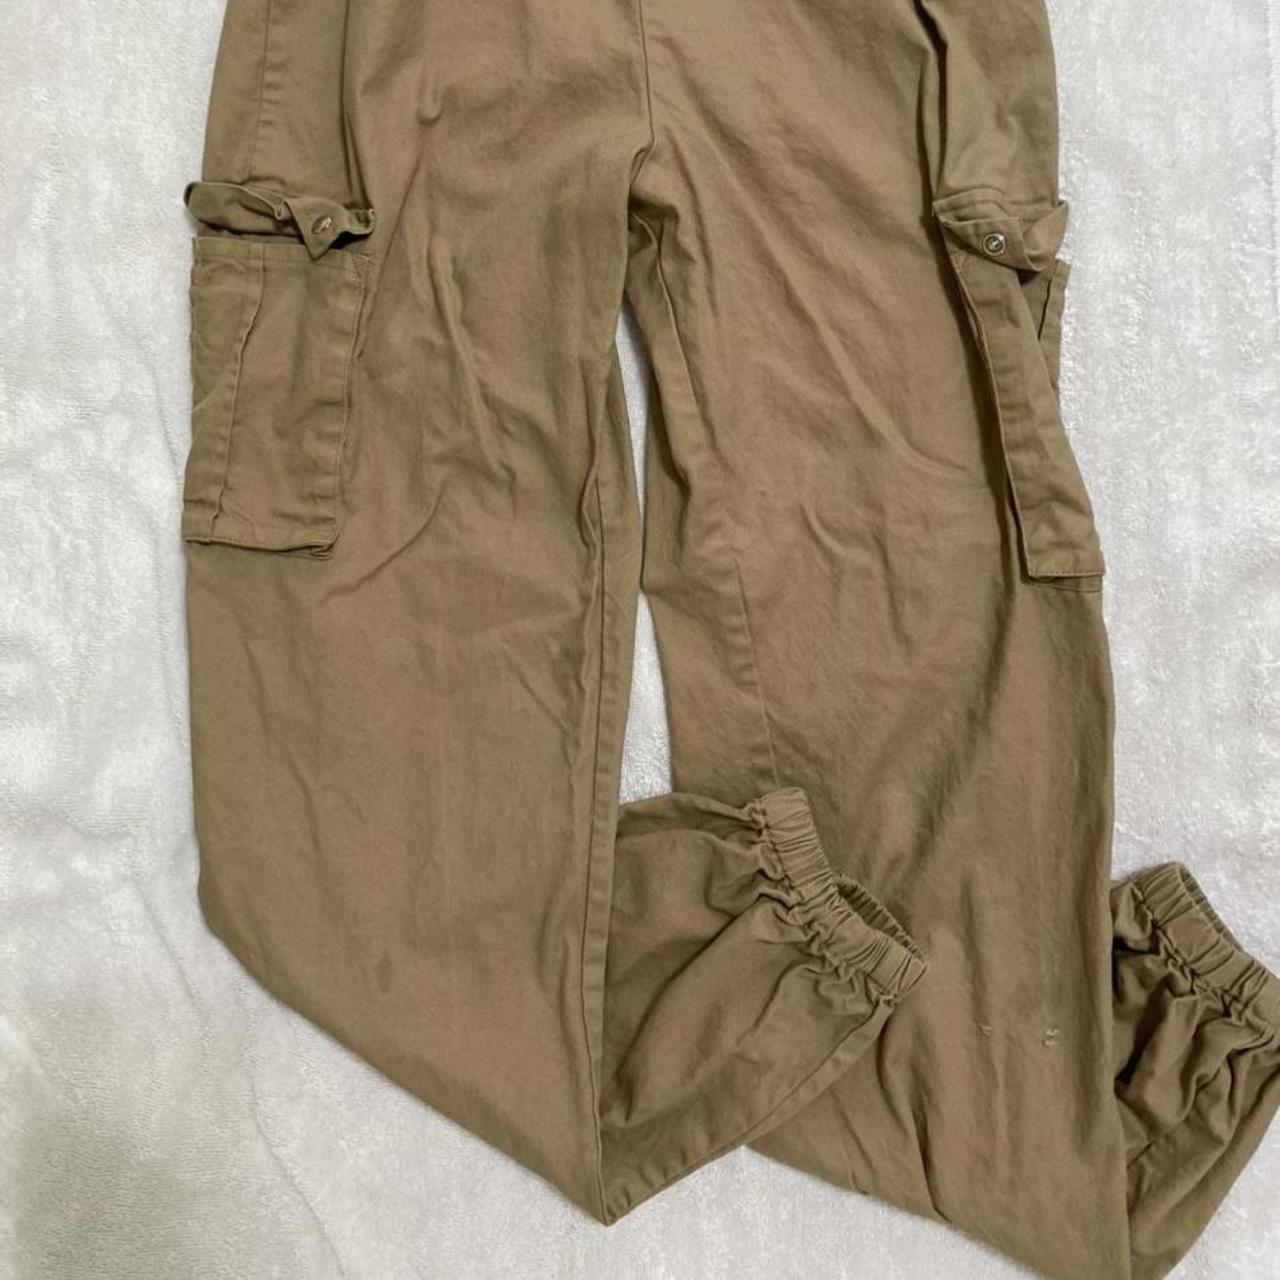 Tan/brown cargo pants from pretty little thing - Depop